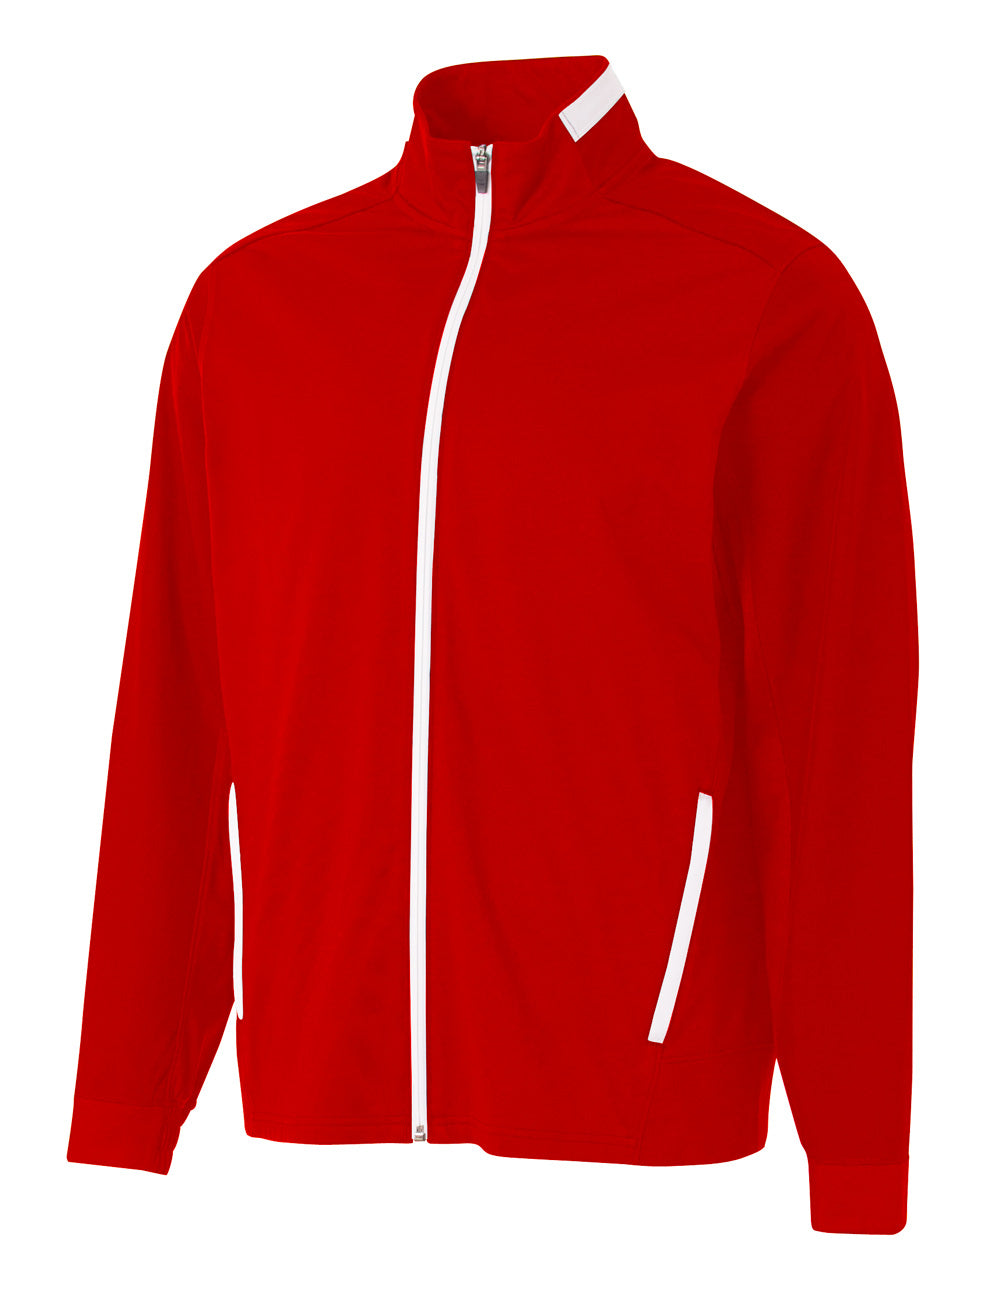 Scarlet/white A4 A4 Youth League Full Zip Warm Up Jacket